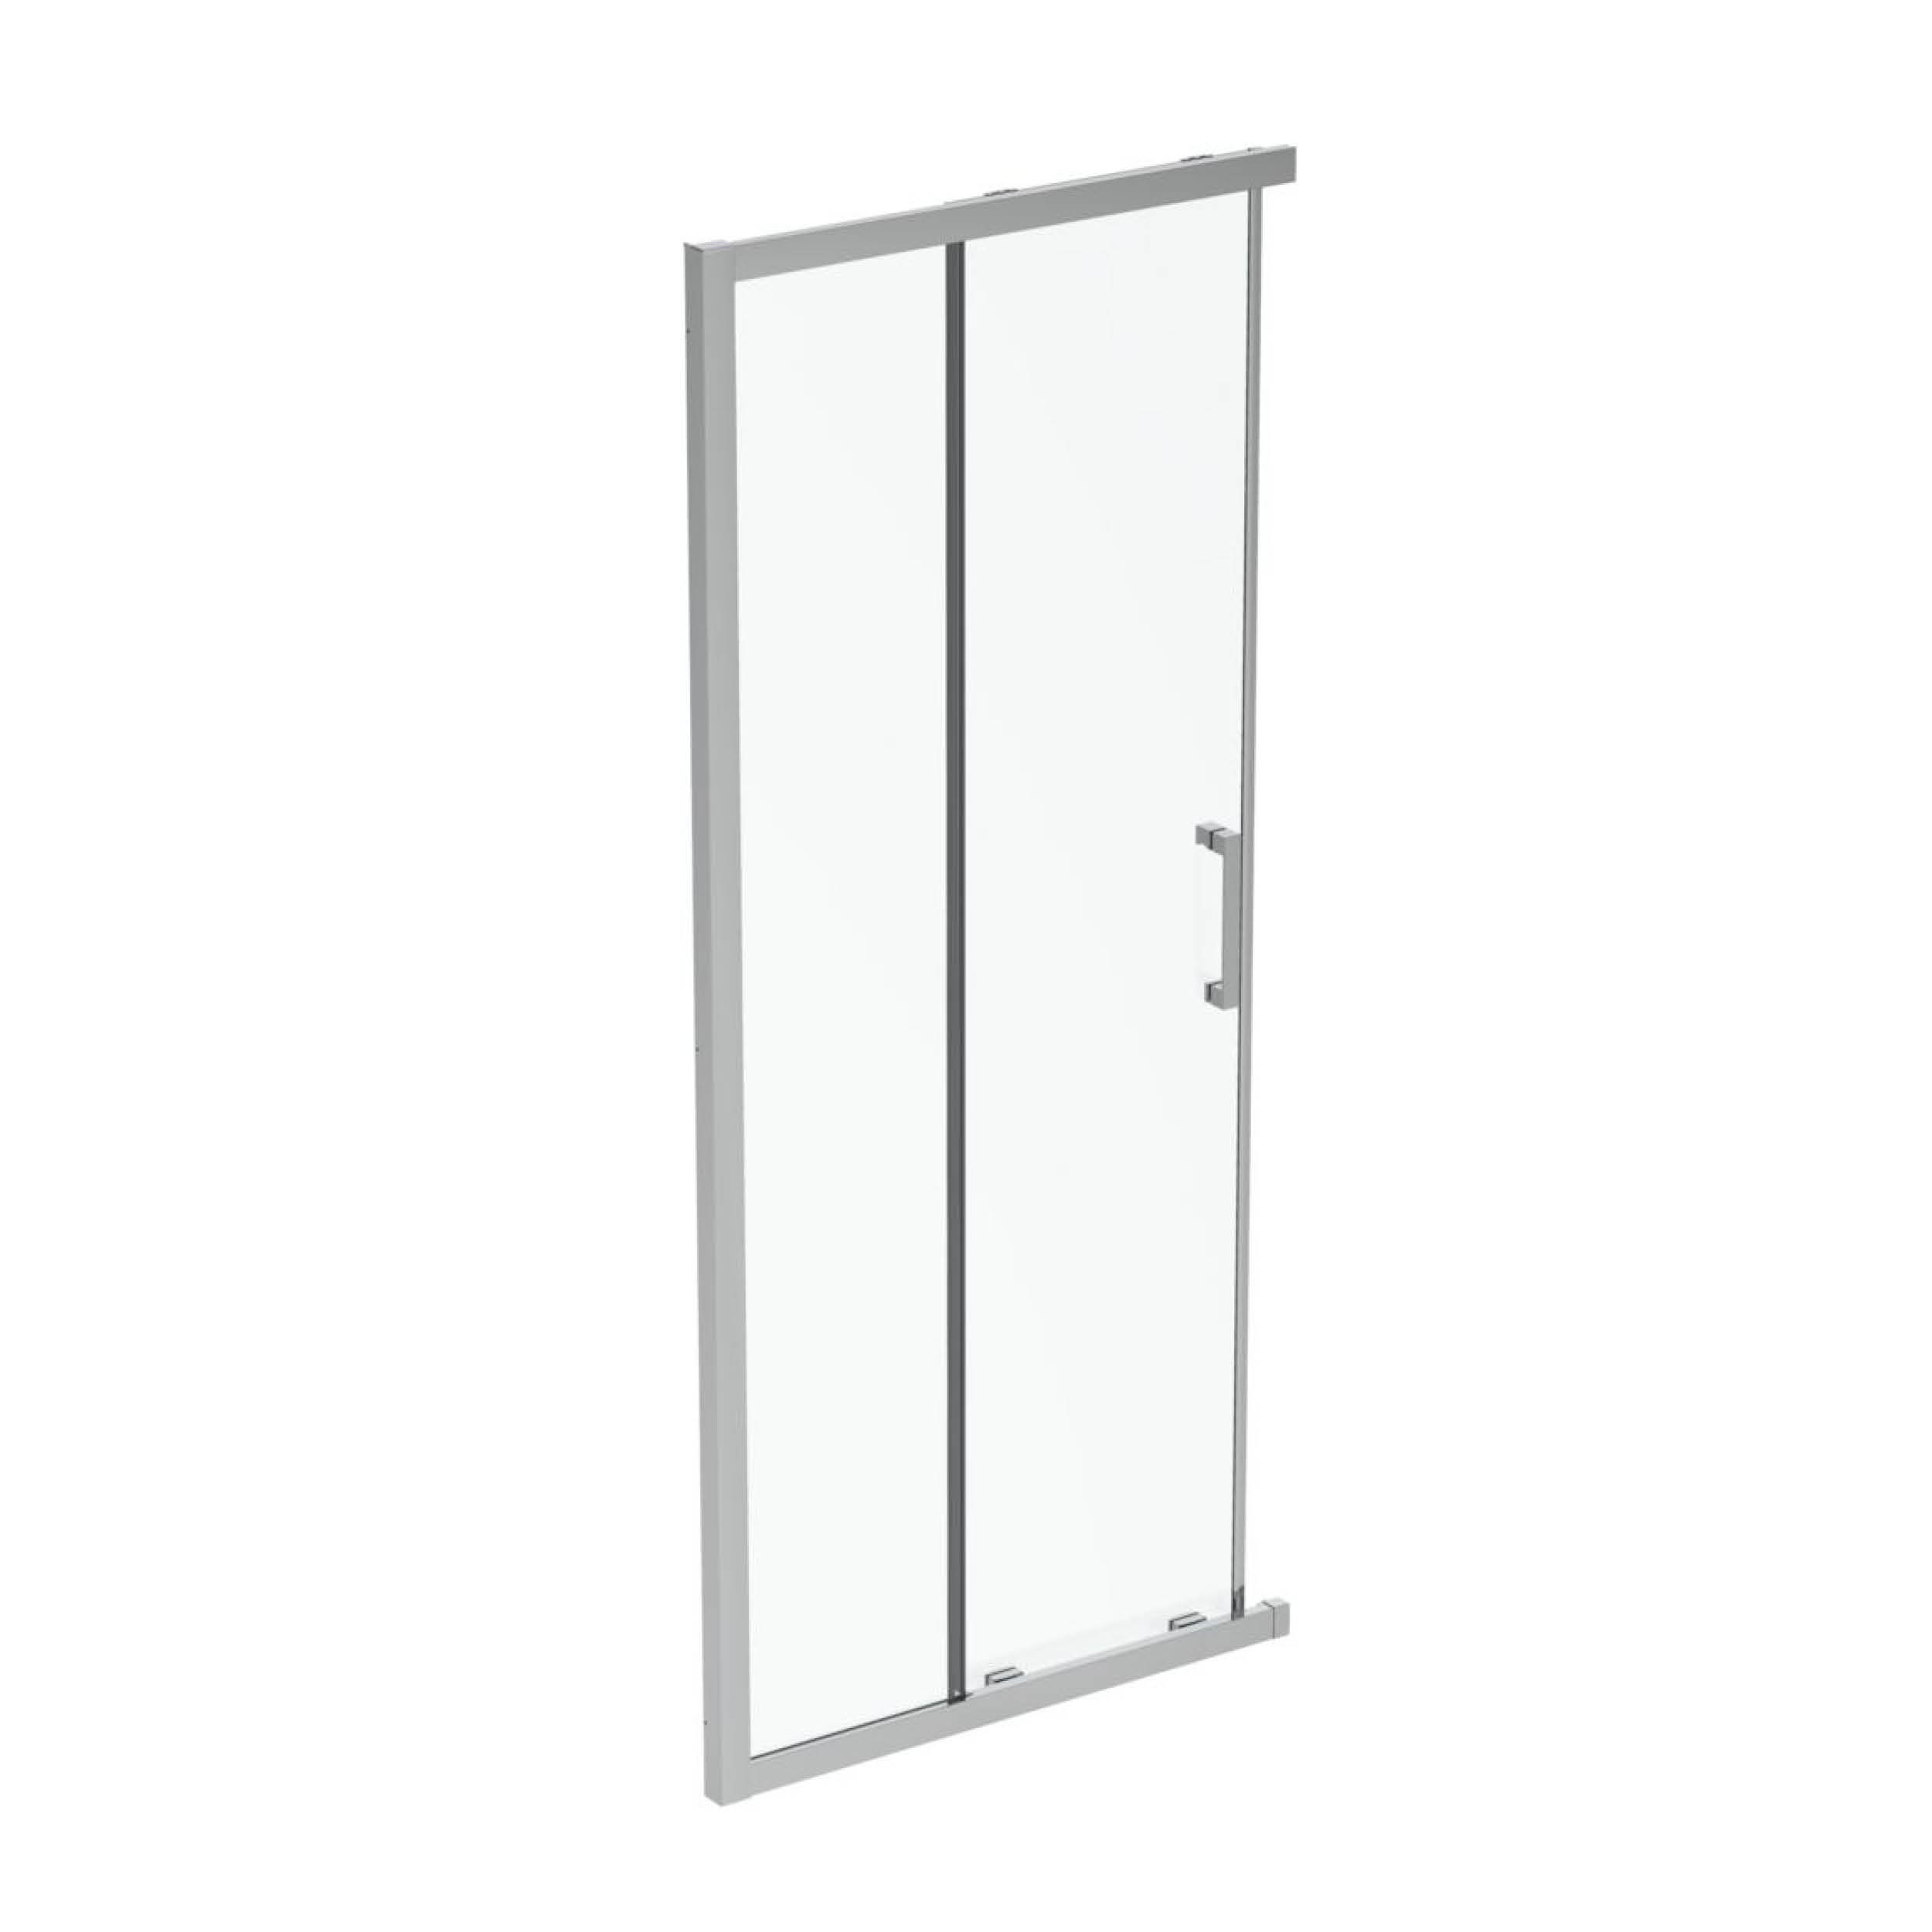 Dušas durvis CONNECT 2, 870-920xH1950mm, Bright silver/clear IdealClean, IDEAL STANDARD